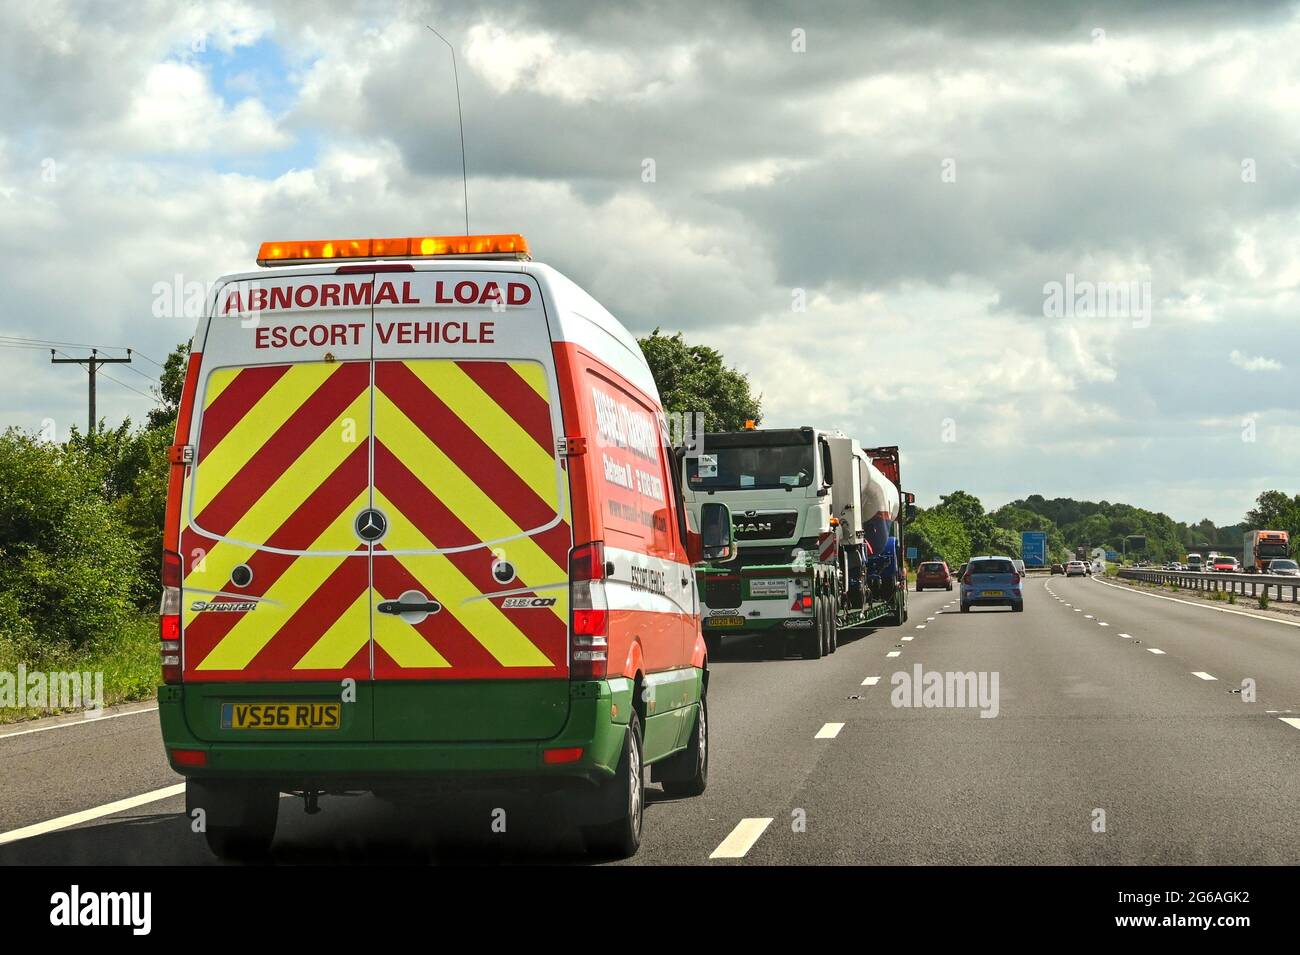 Swindon, England - June 2021: Vehicle with flashing lights escorting an abnormal load on the M4 motorway Stock Photo